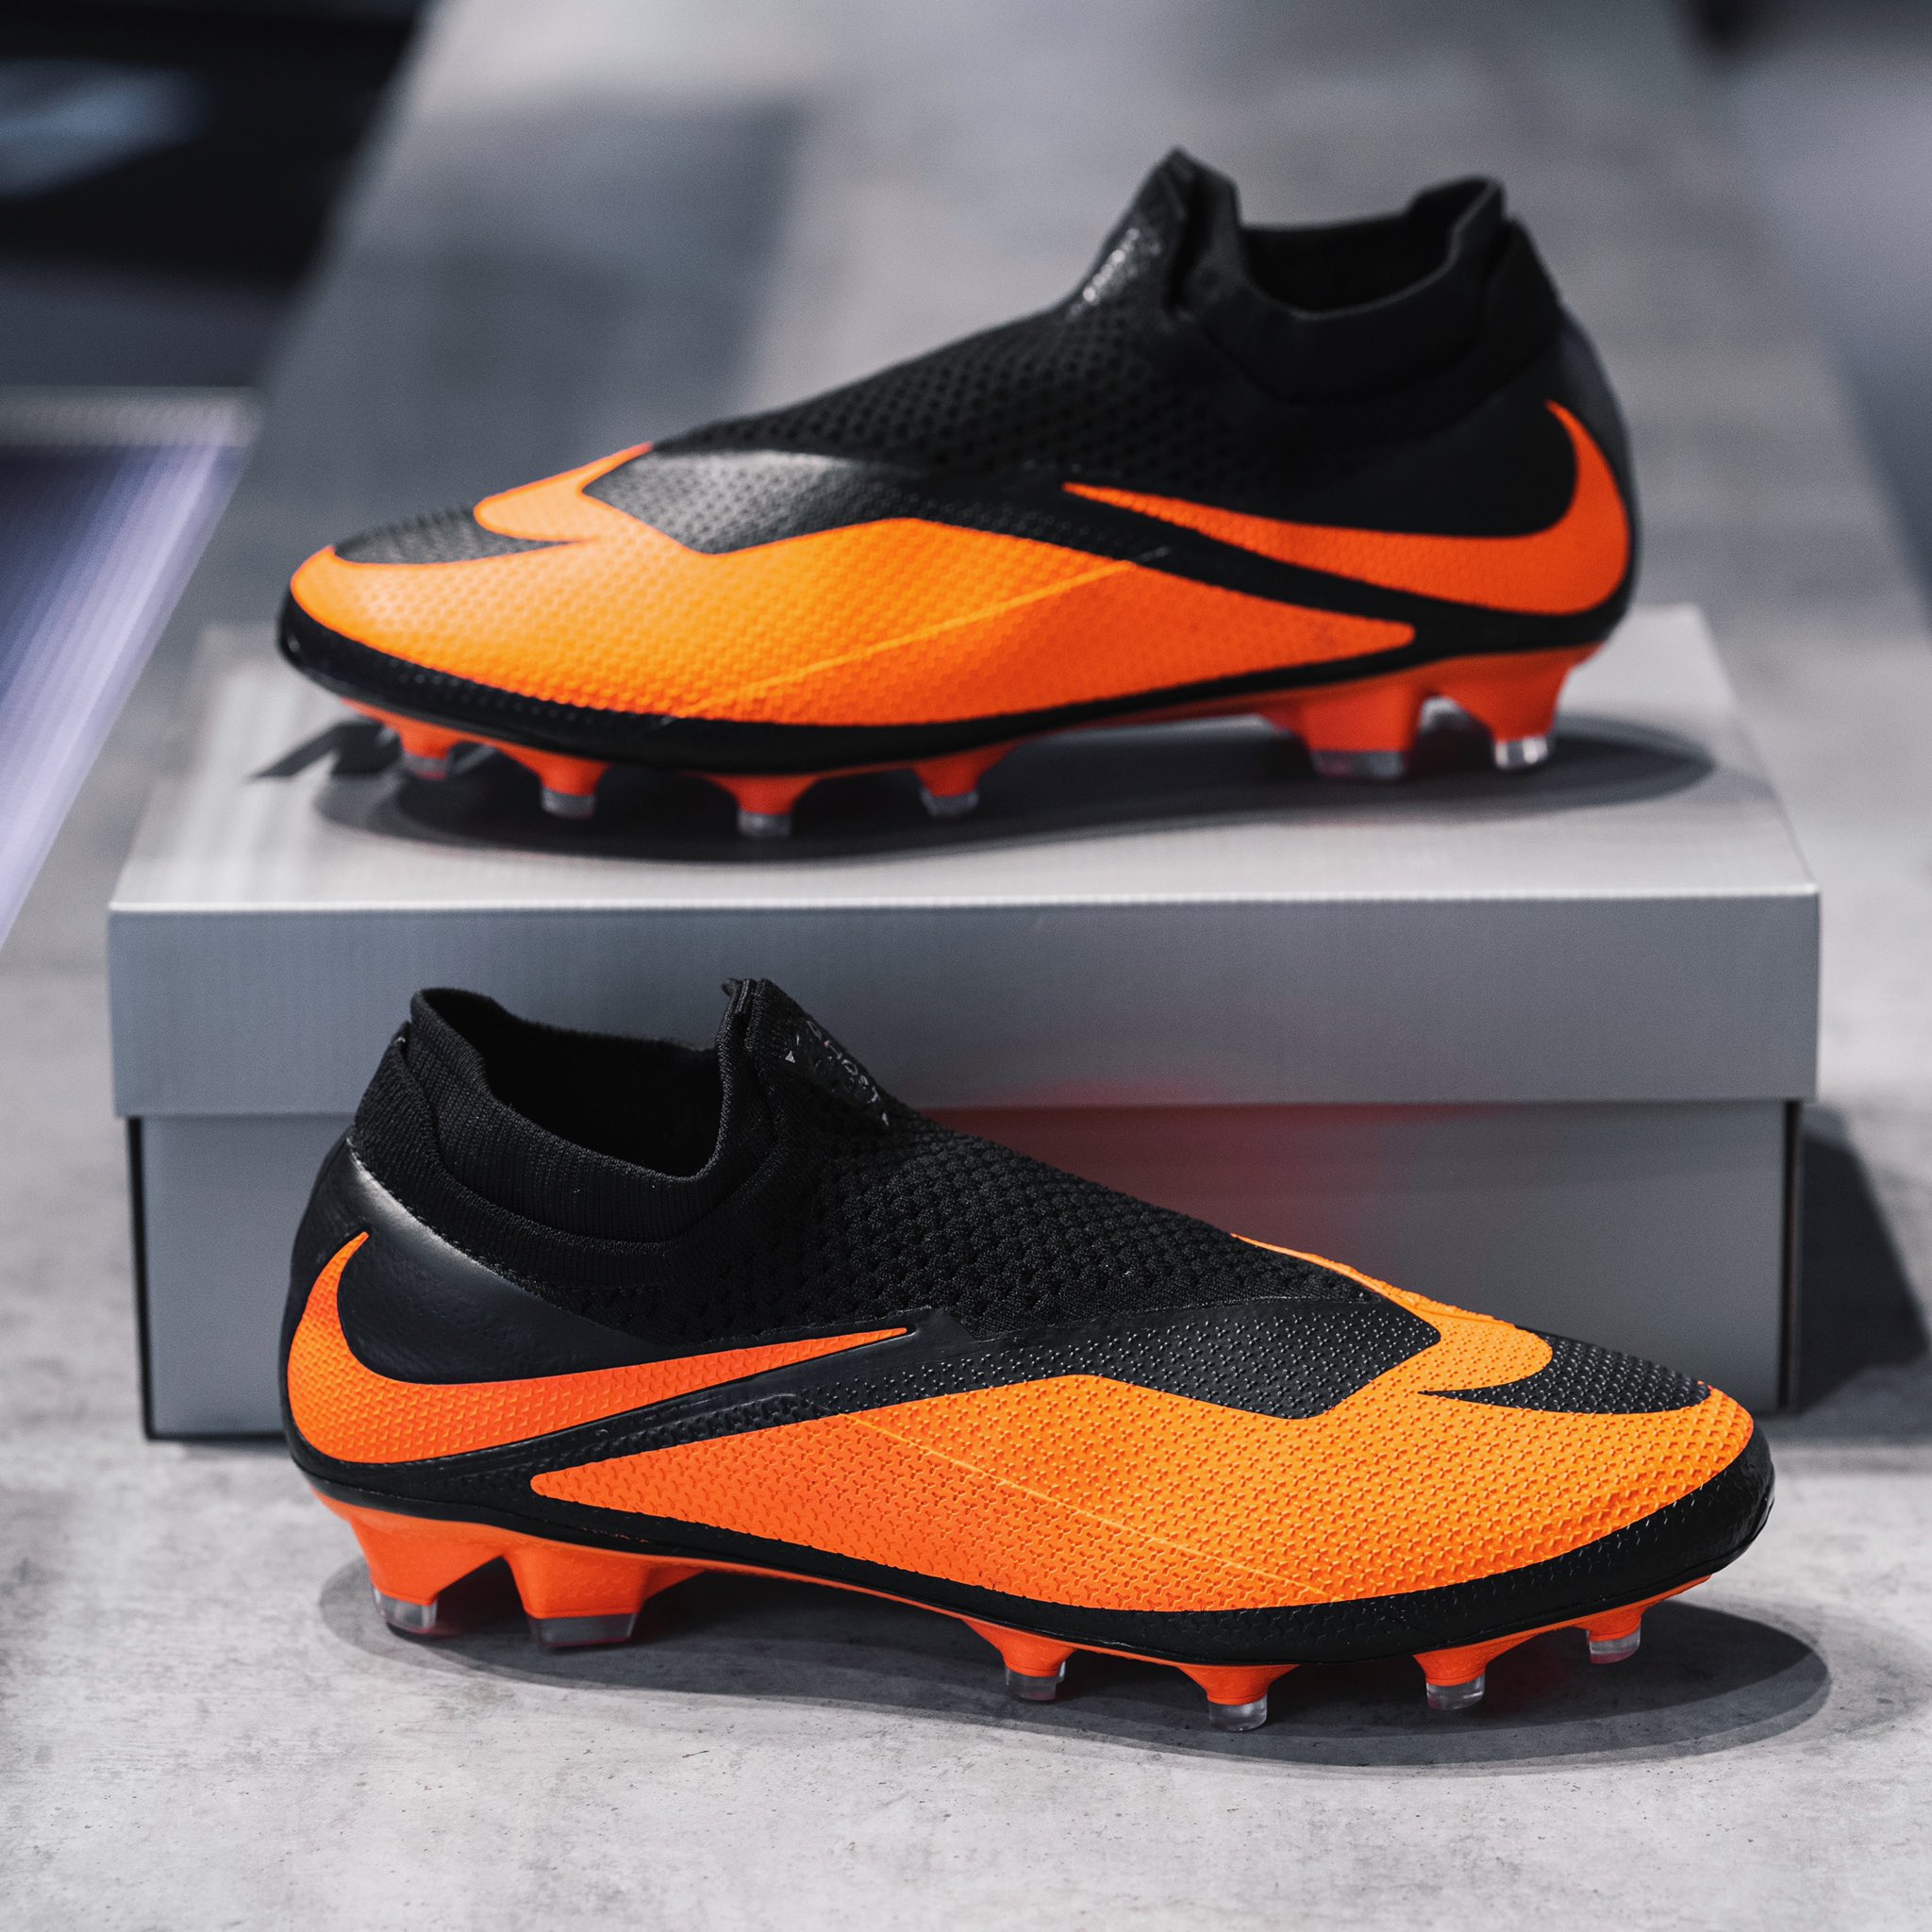 Engañoso Extinto Náutico Pro:Direct Soccer en Twitter: "Just Dropped 🔥 Nike Future DNA Hypervenom  in "Bright Citrus &amp; Black". A nod to a past great of 2013. Cop first  and fast at #ProDirect ➡️🛒 https://t.co/OOBC9wHD6k